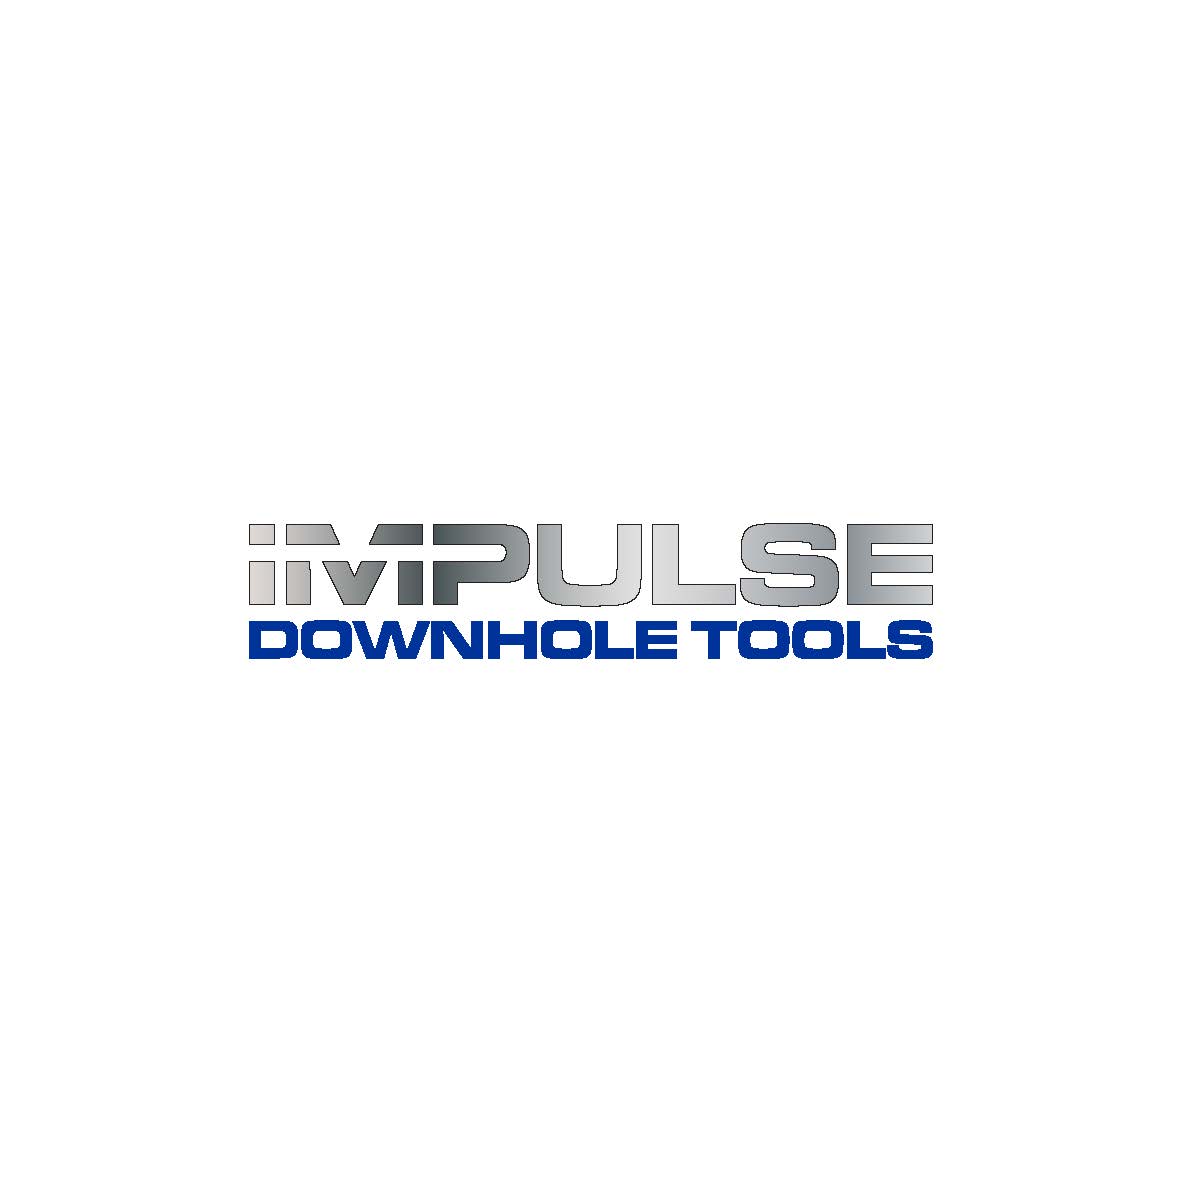 Thank you to Impulse Downhole Tools for the sponsorship